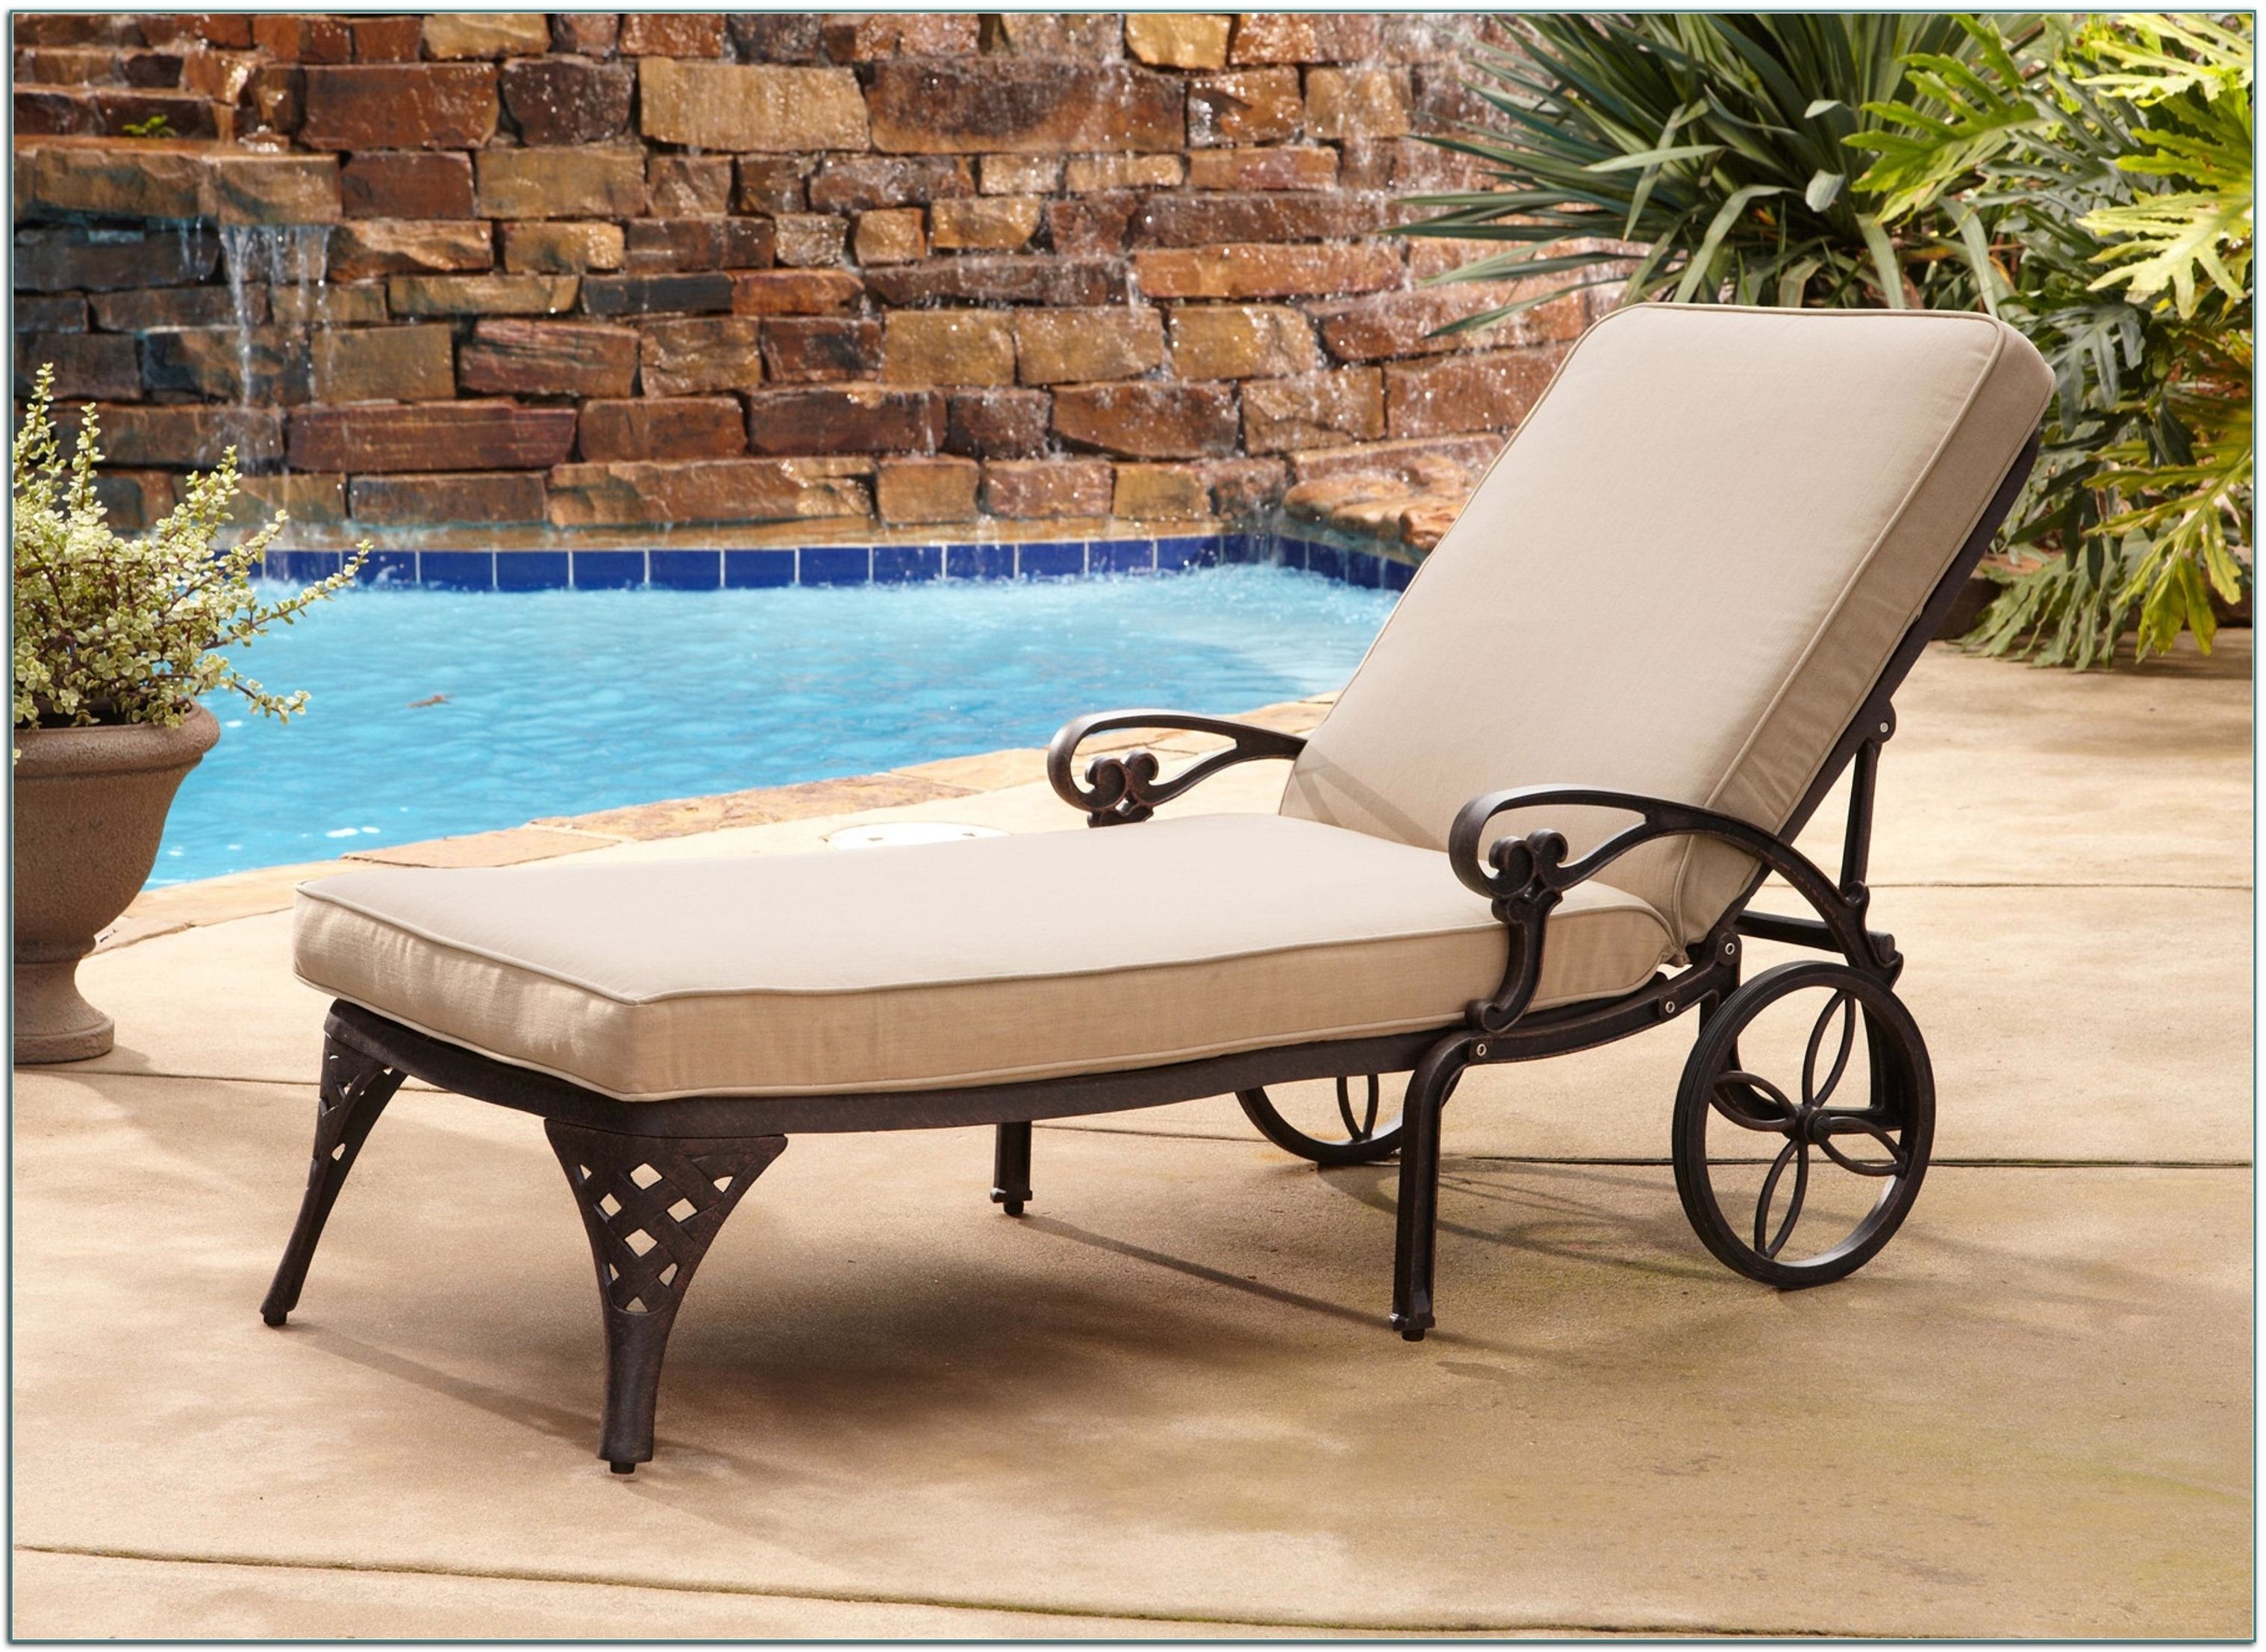 Most Recent Aluminum Poolside Lounge Chairs • Lounge Chairs Ideas Inside Lakeport Outdoor Adjustable Chaise Lounge Chairs (View 9 of 15)